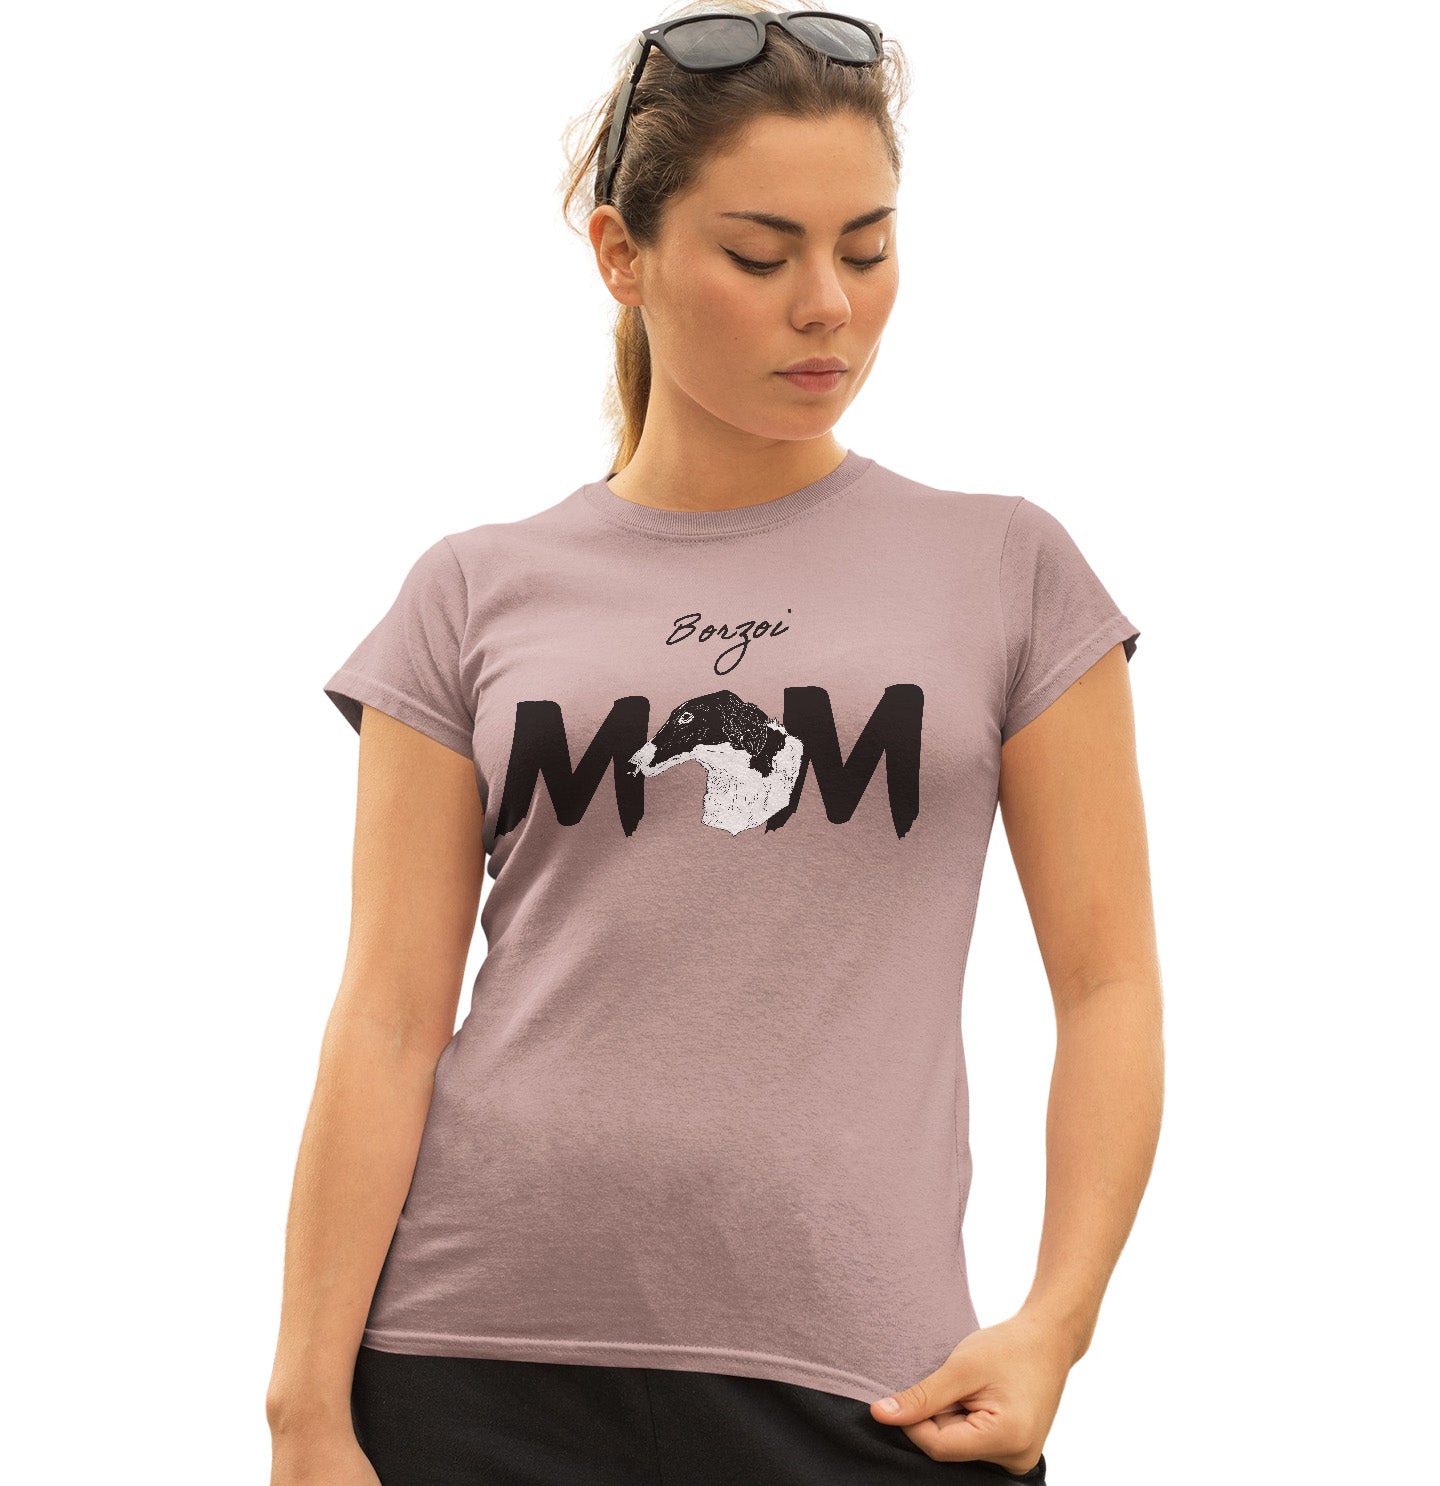 Borzoi Breed Mom - Women's Fitted T-Shirt